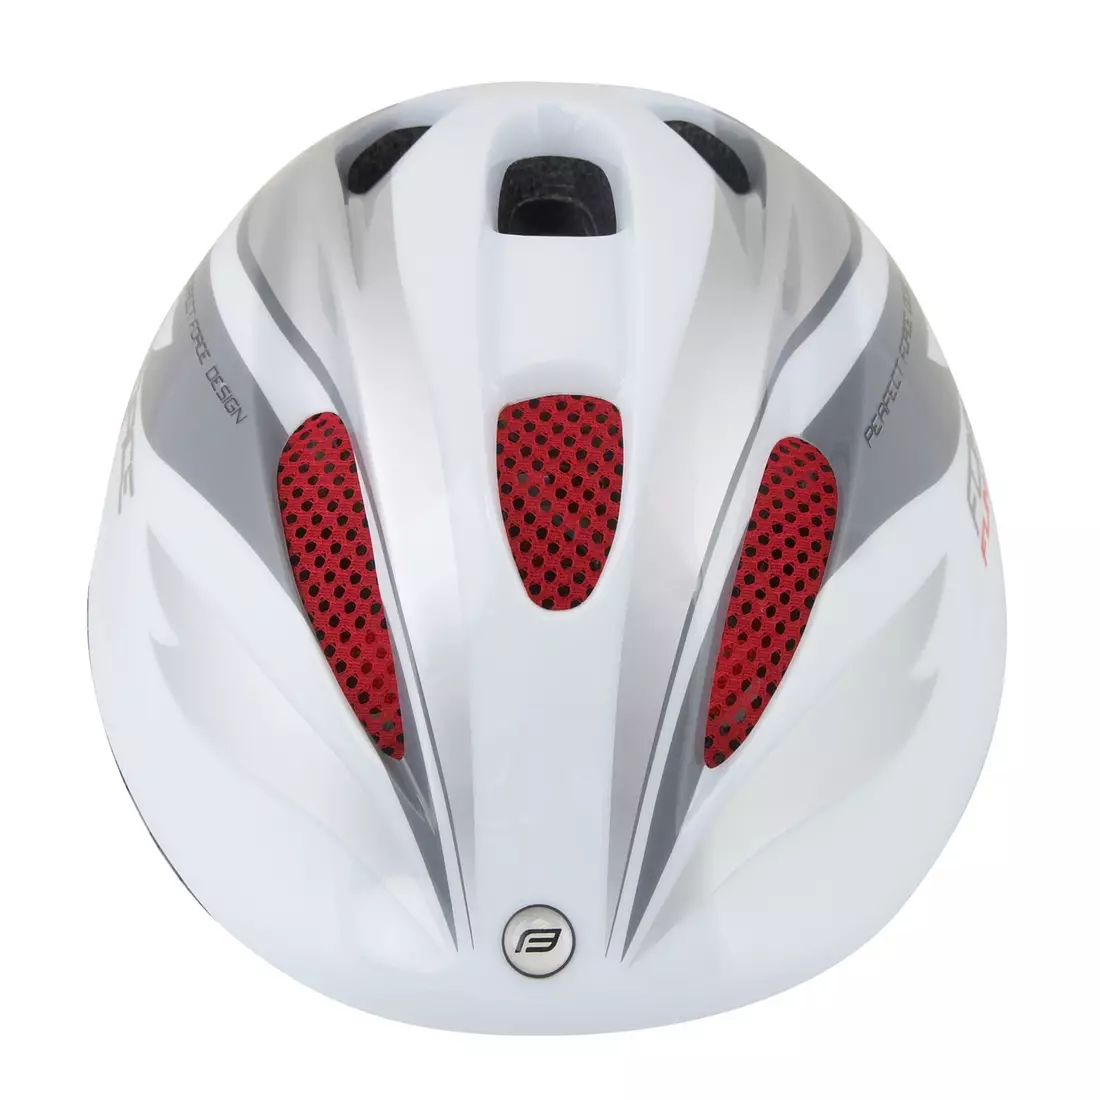 FORCE children's bicycle helmet FUN STRIPES, White and red